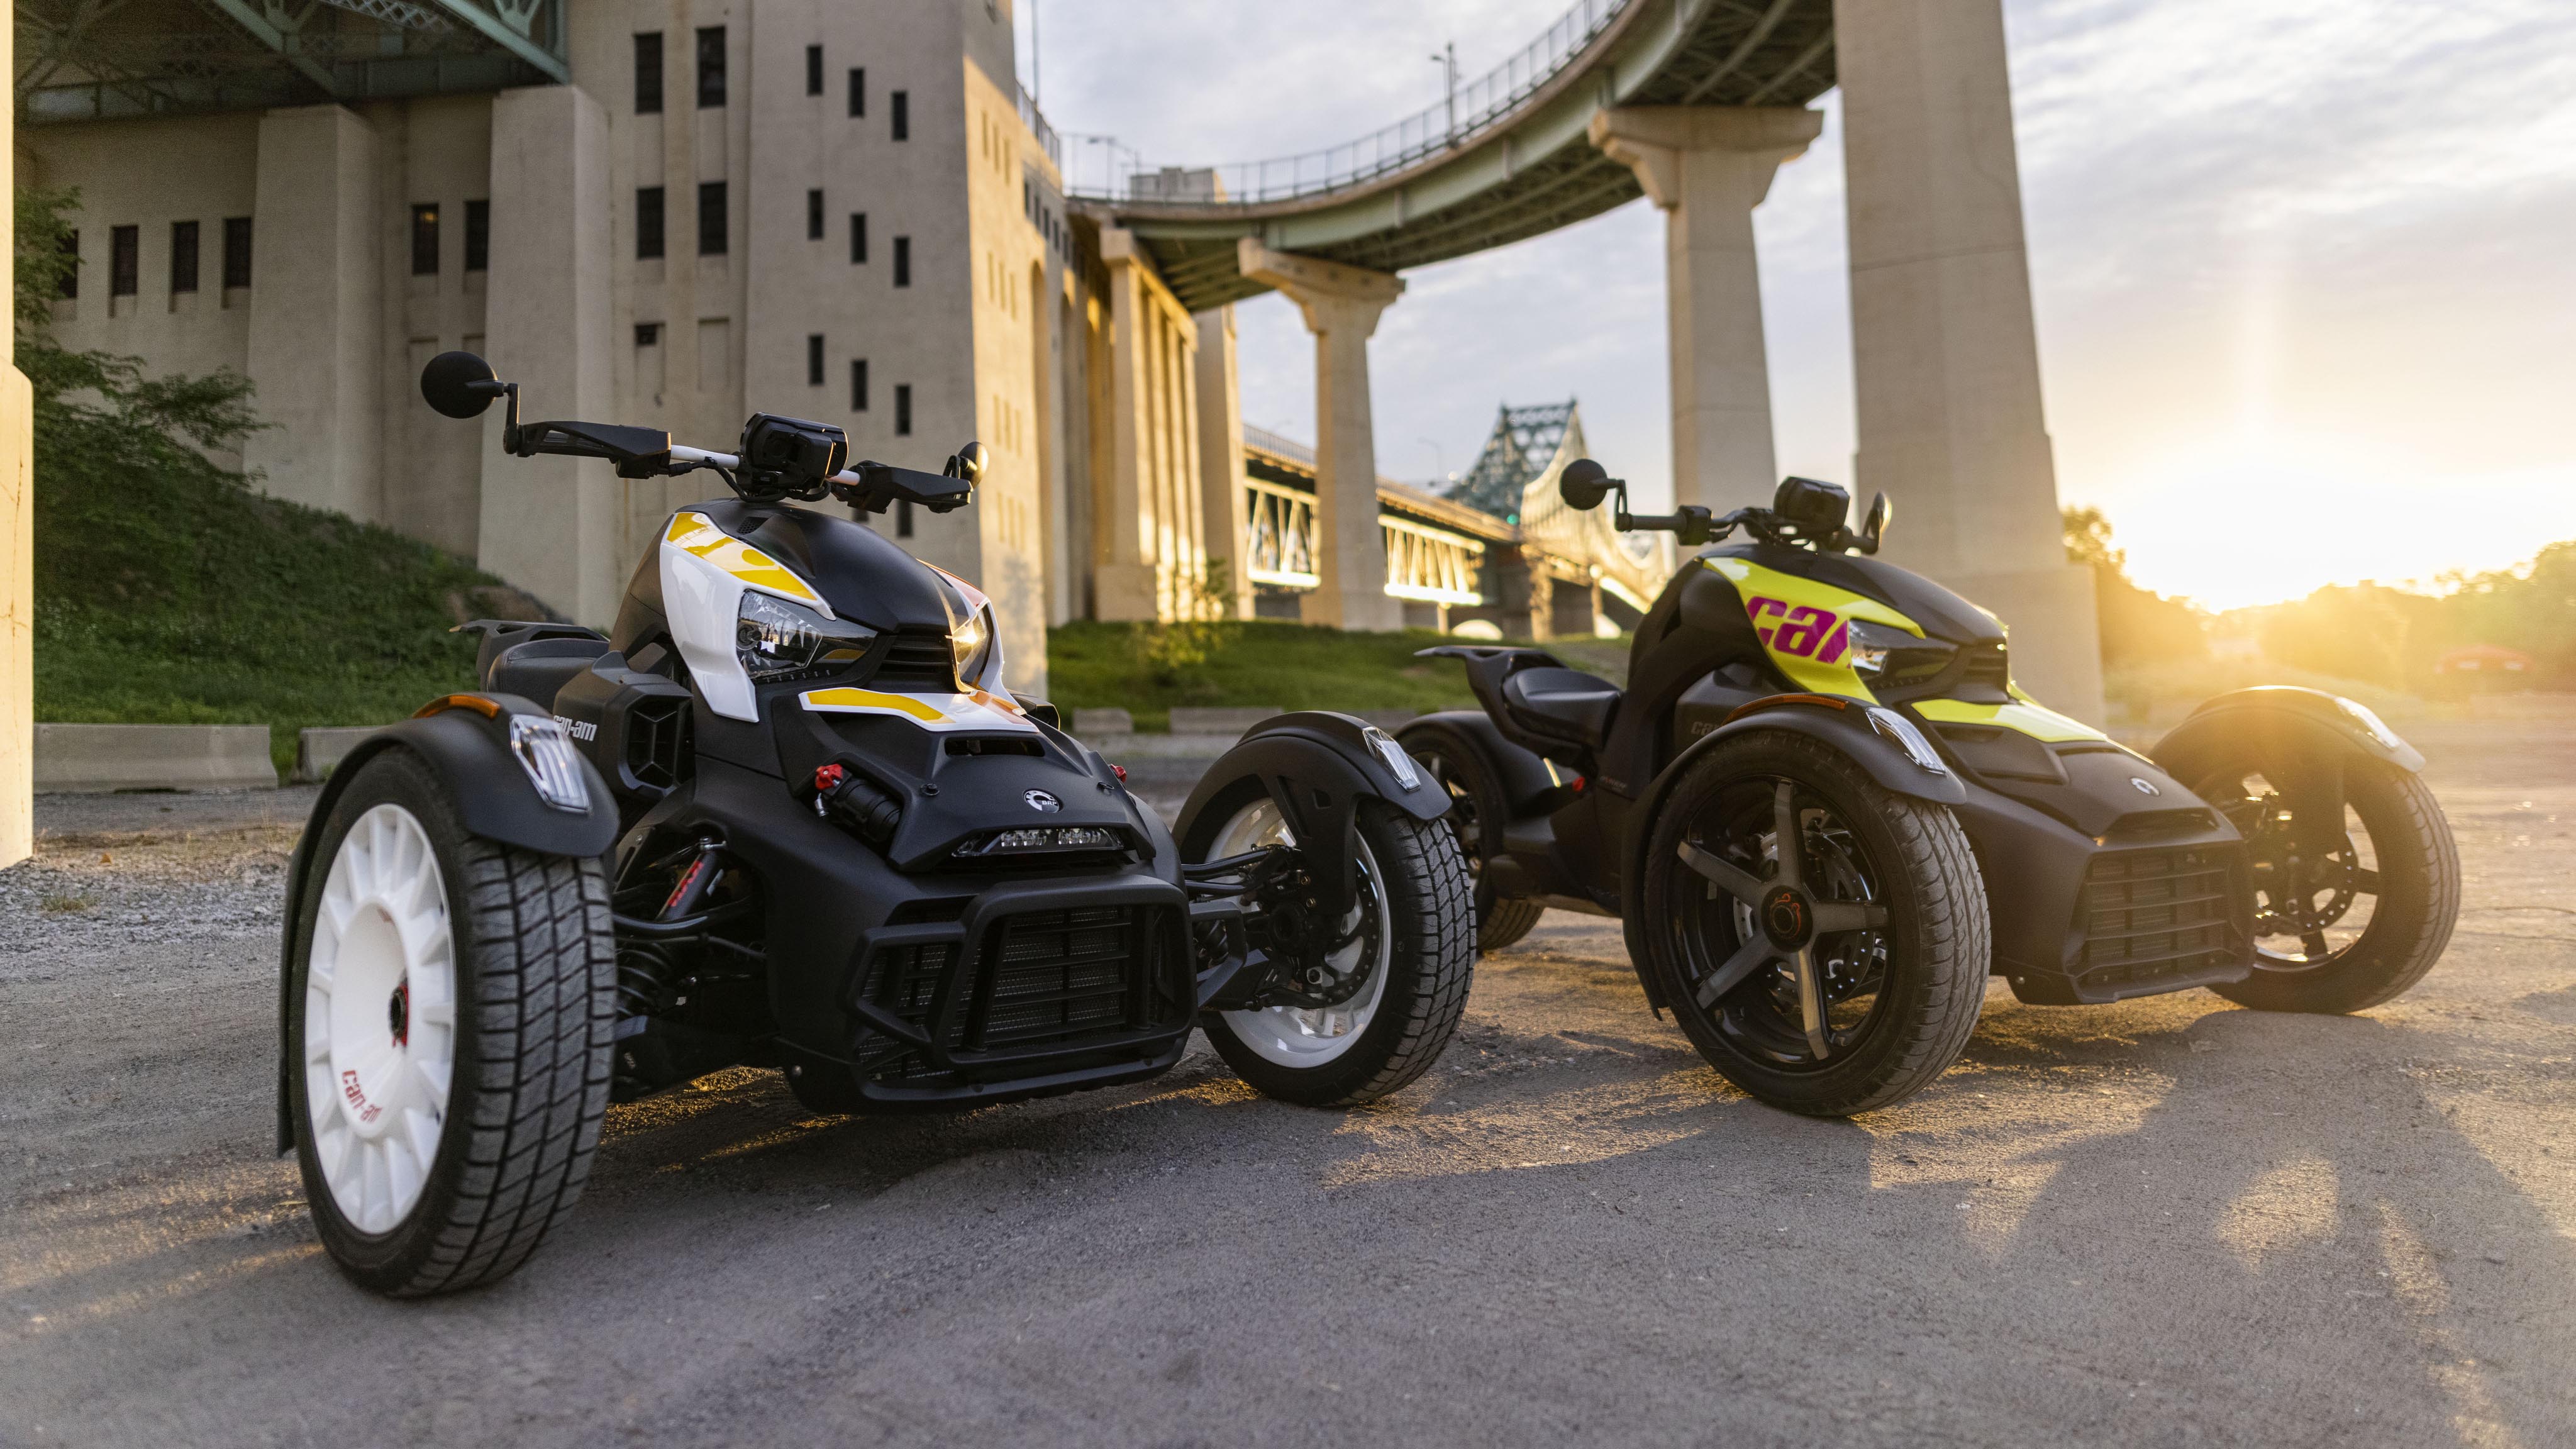 Two Can-Am Ryker customized